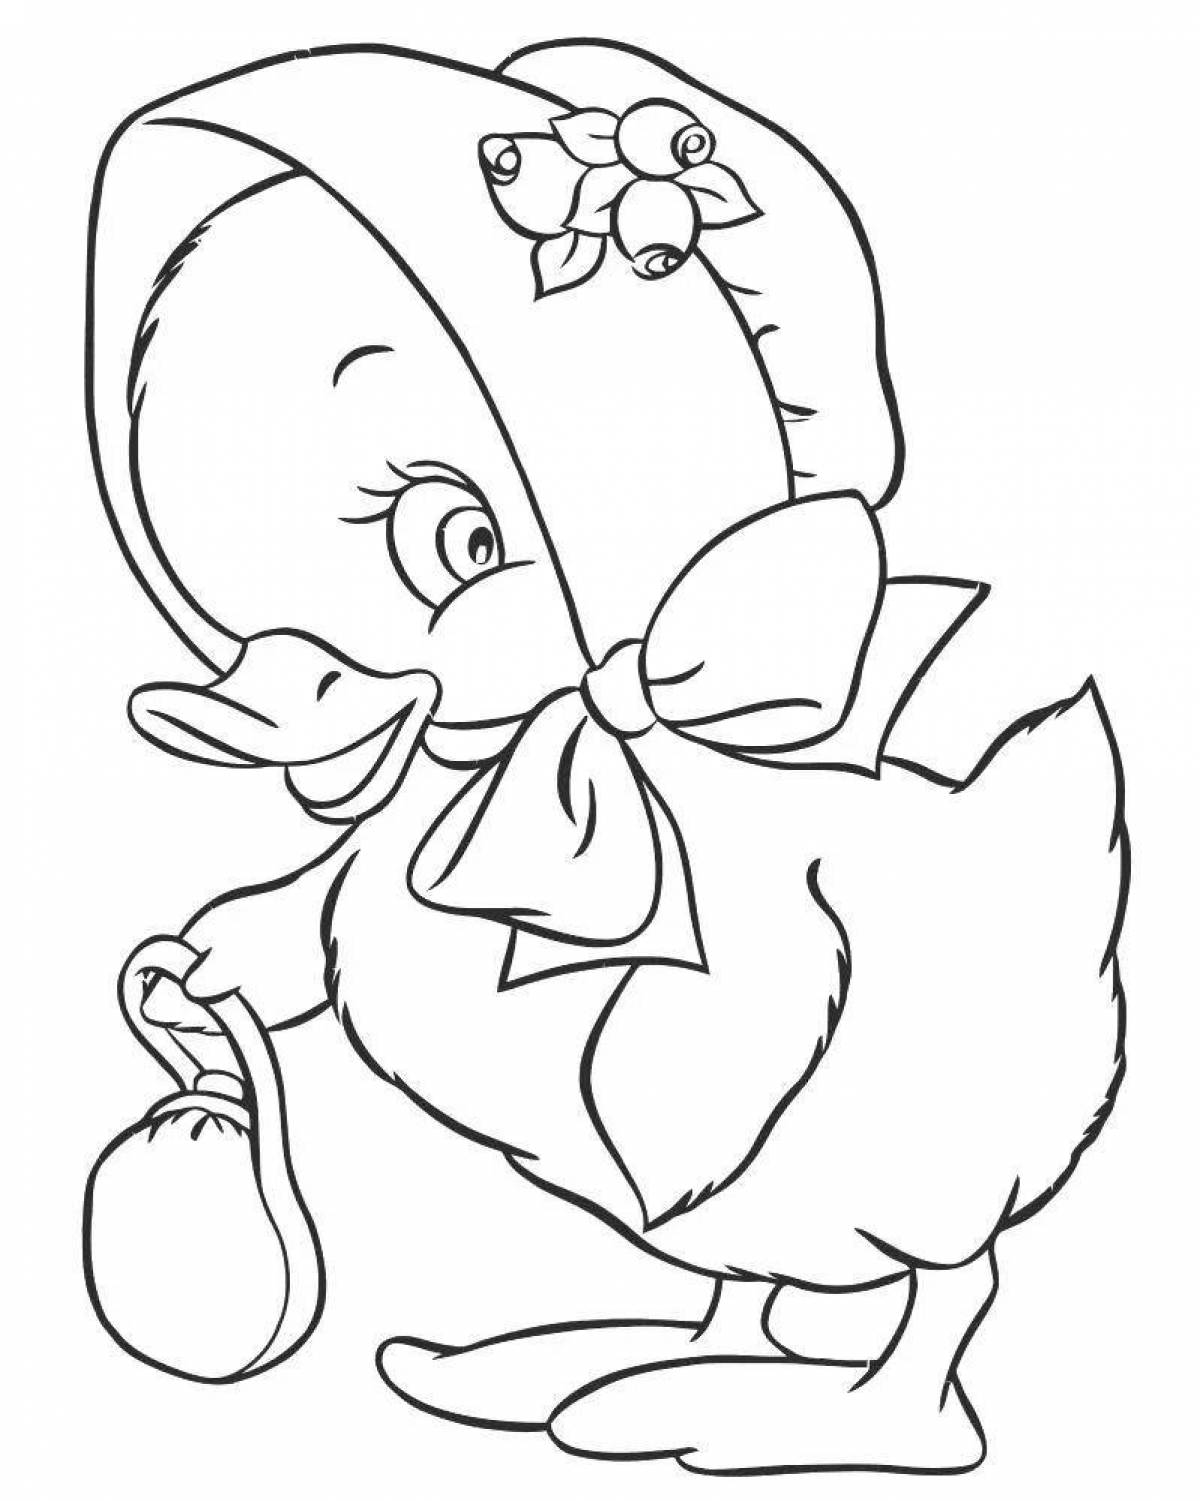 Coloring page flapping chicken and duckling